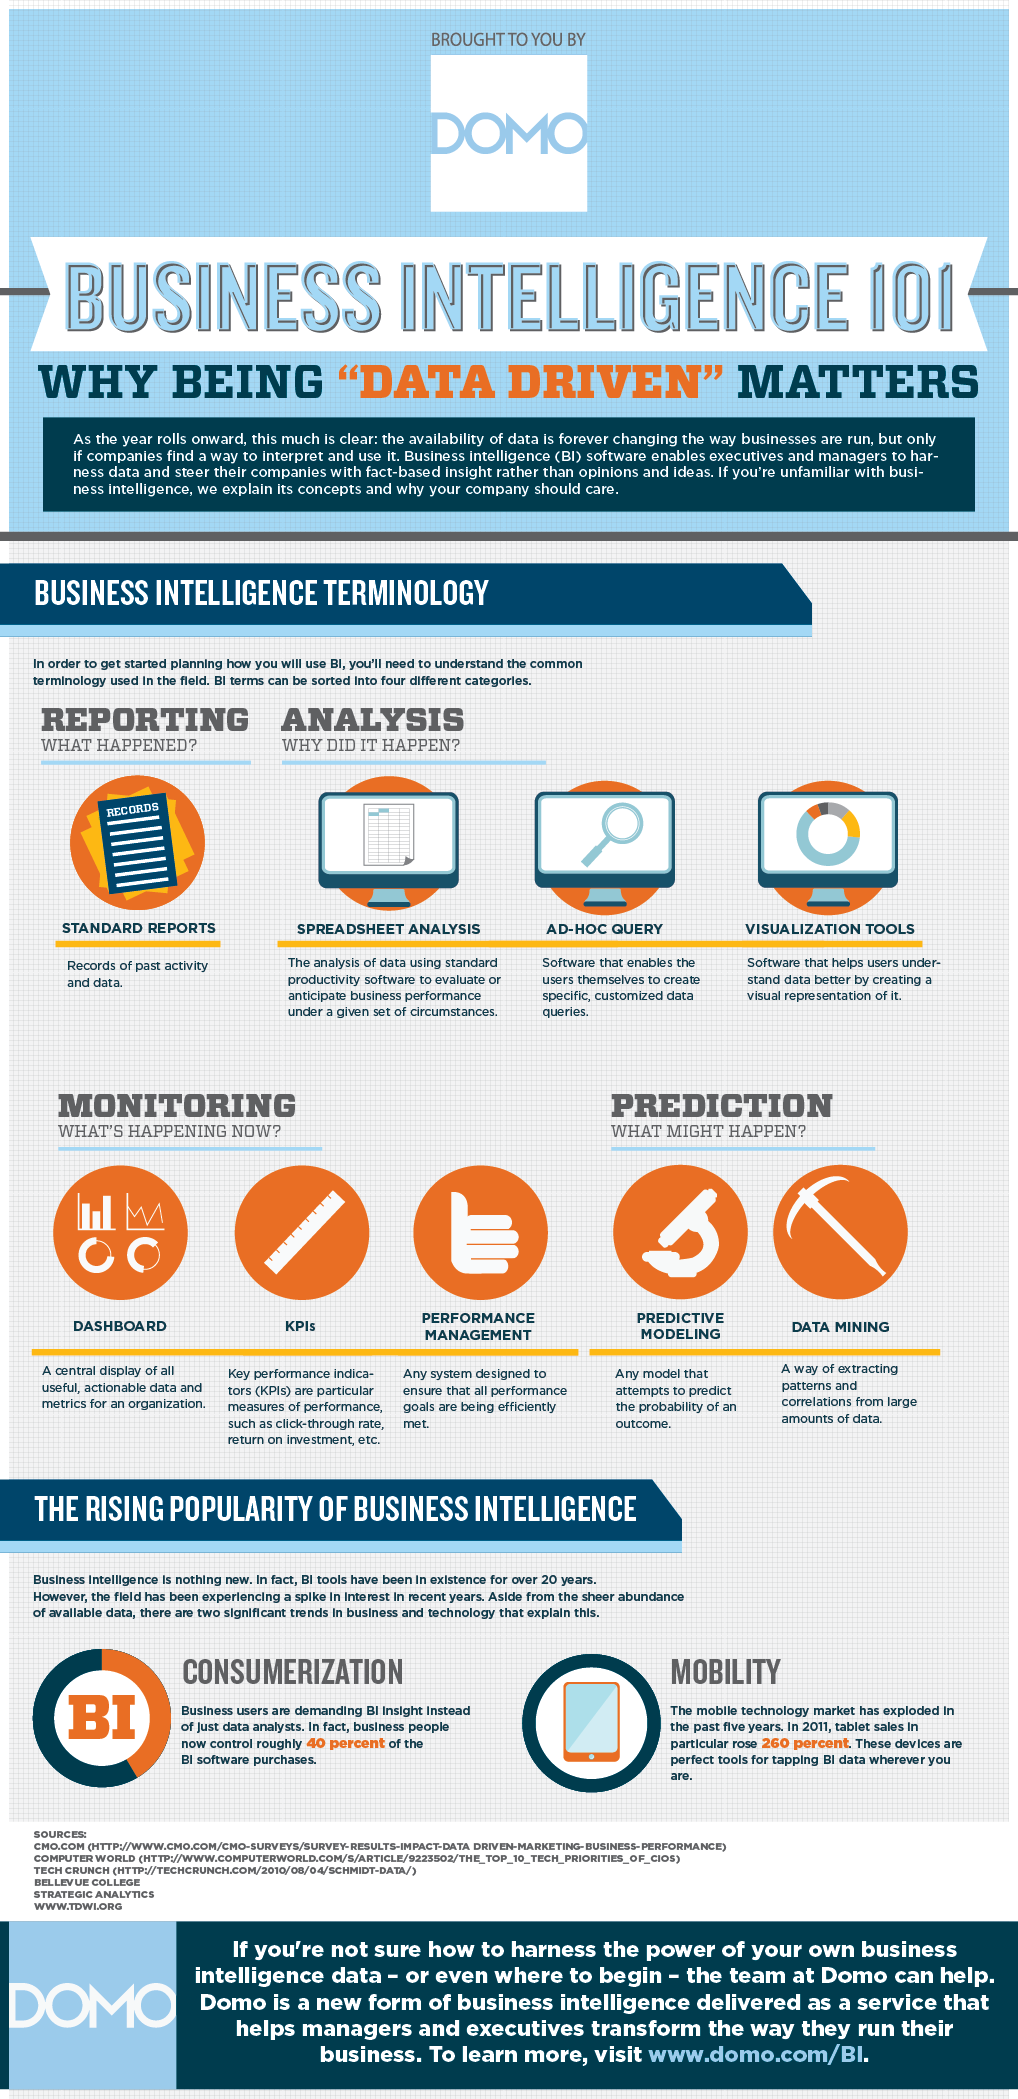 Business-Intelligence-101-infographic